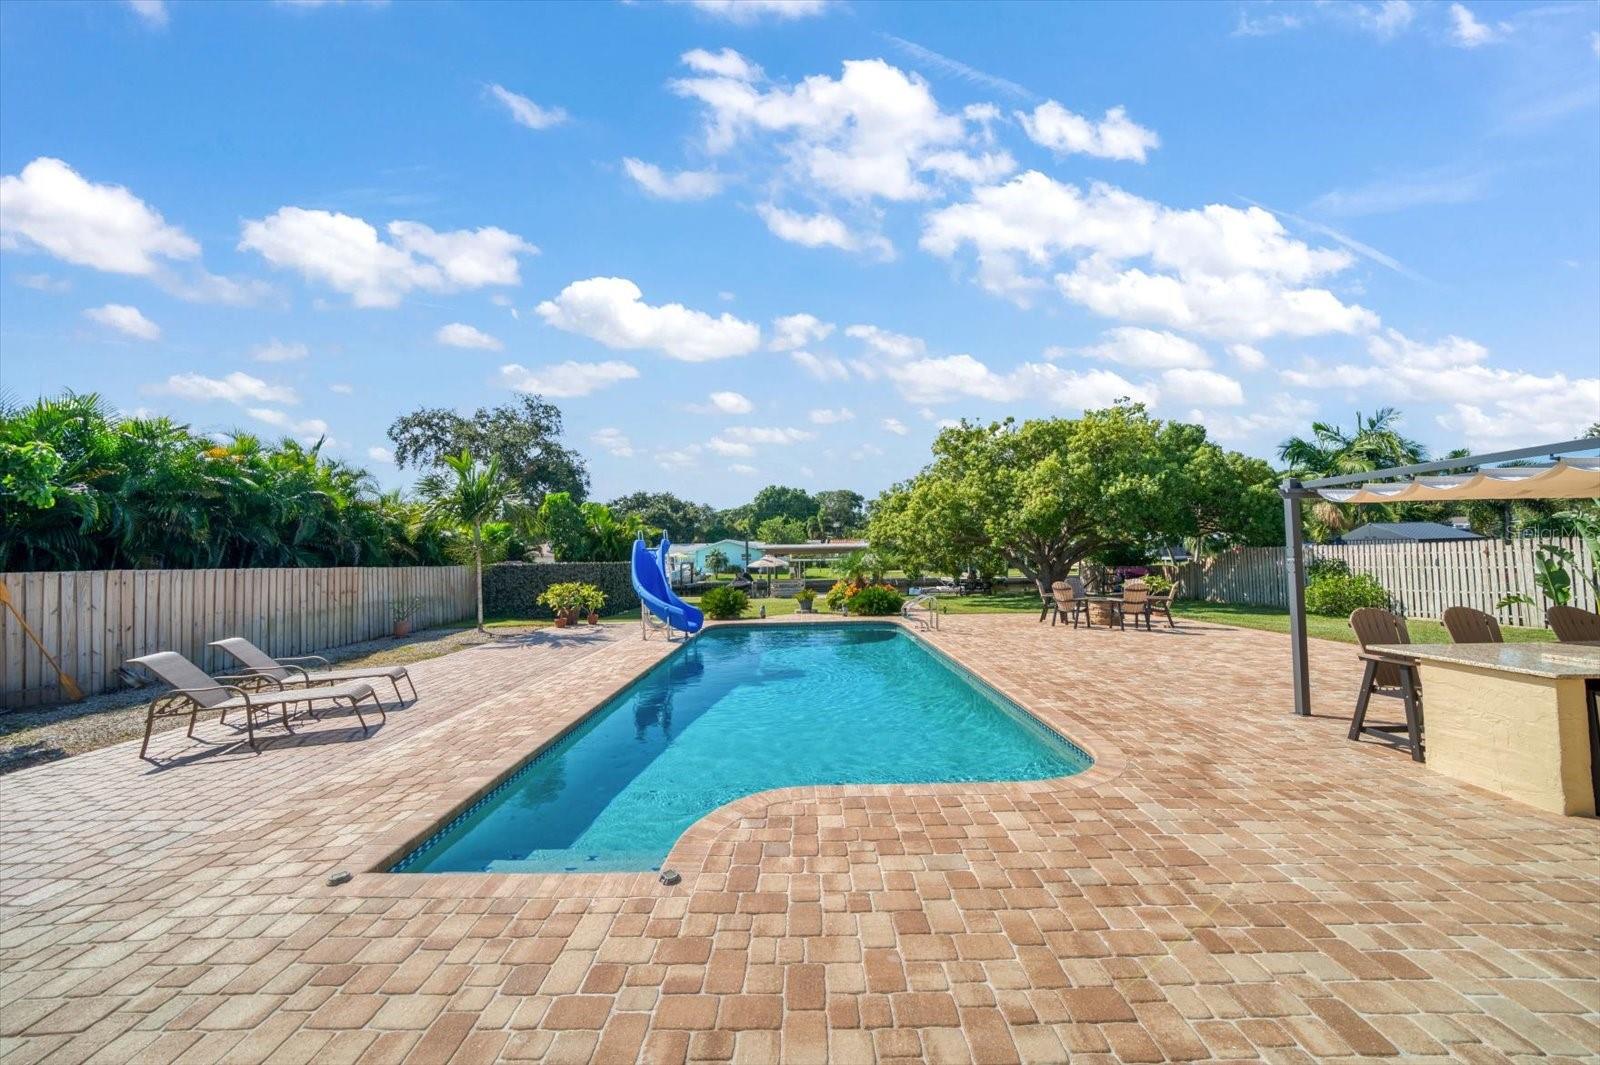 Impressive, spacious and private yard with a spectacular 15x35 ft. Heated pool.Imagine the fun…ALL year!